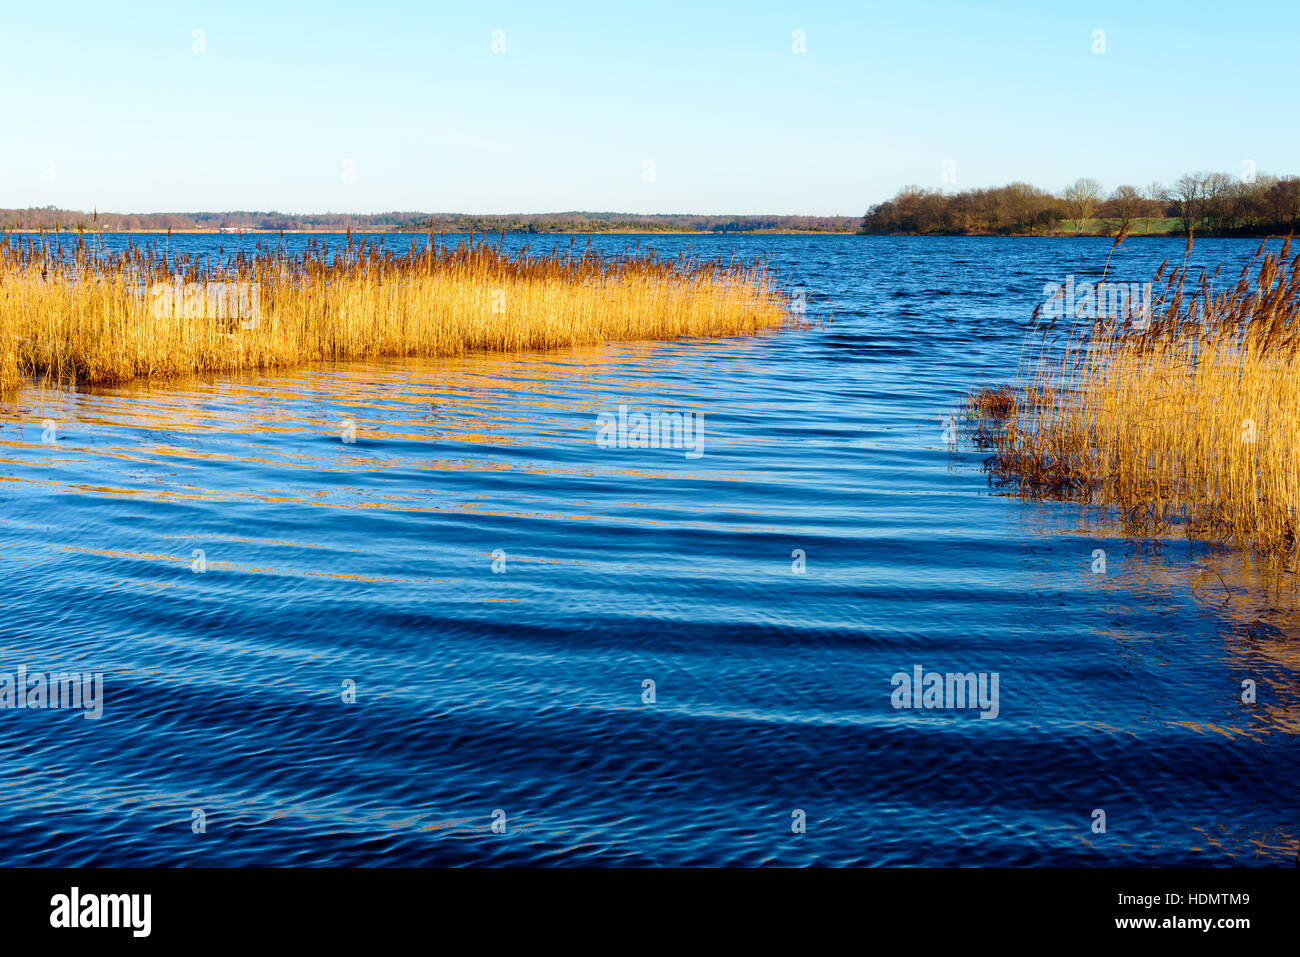 Narrow waterway inlet in reed bed with the south Swedish archipelago in the background. Stock Photo